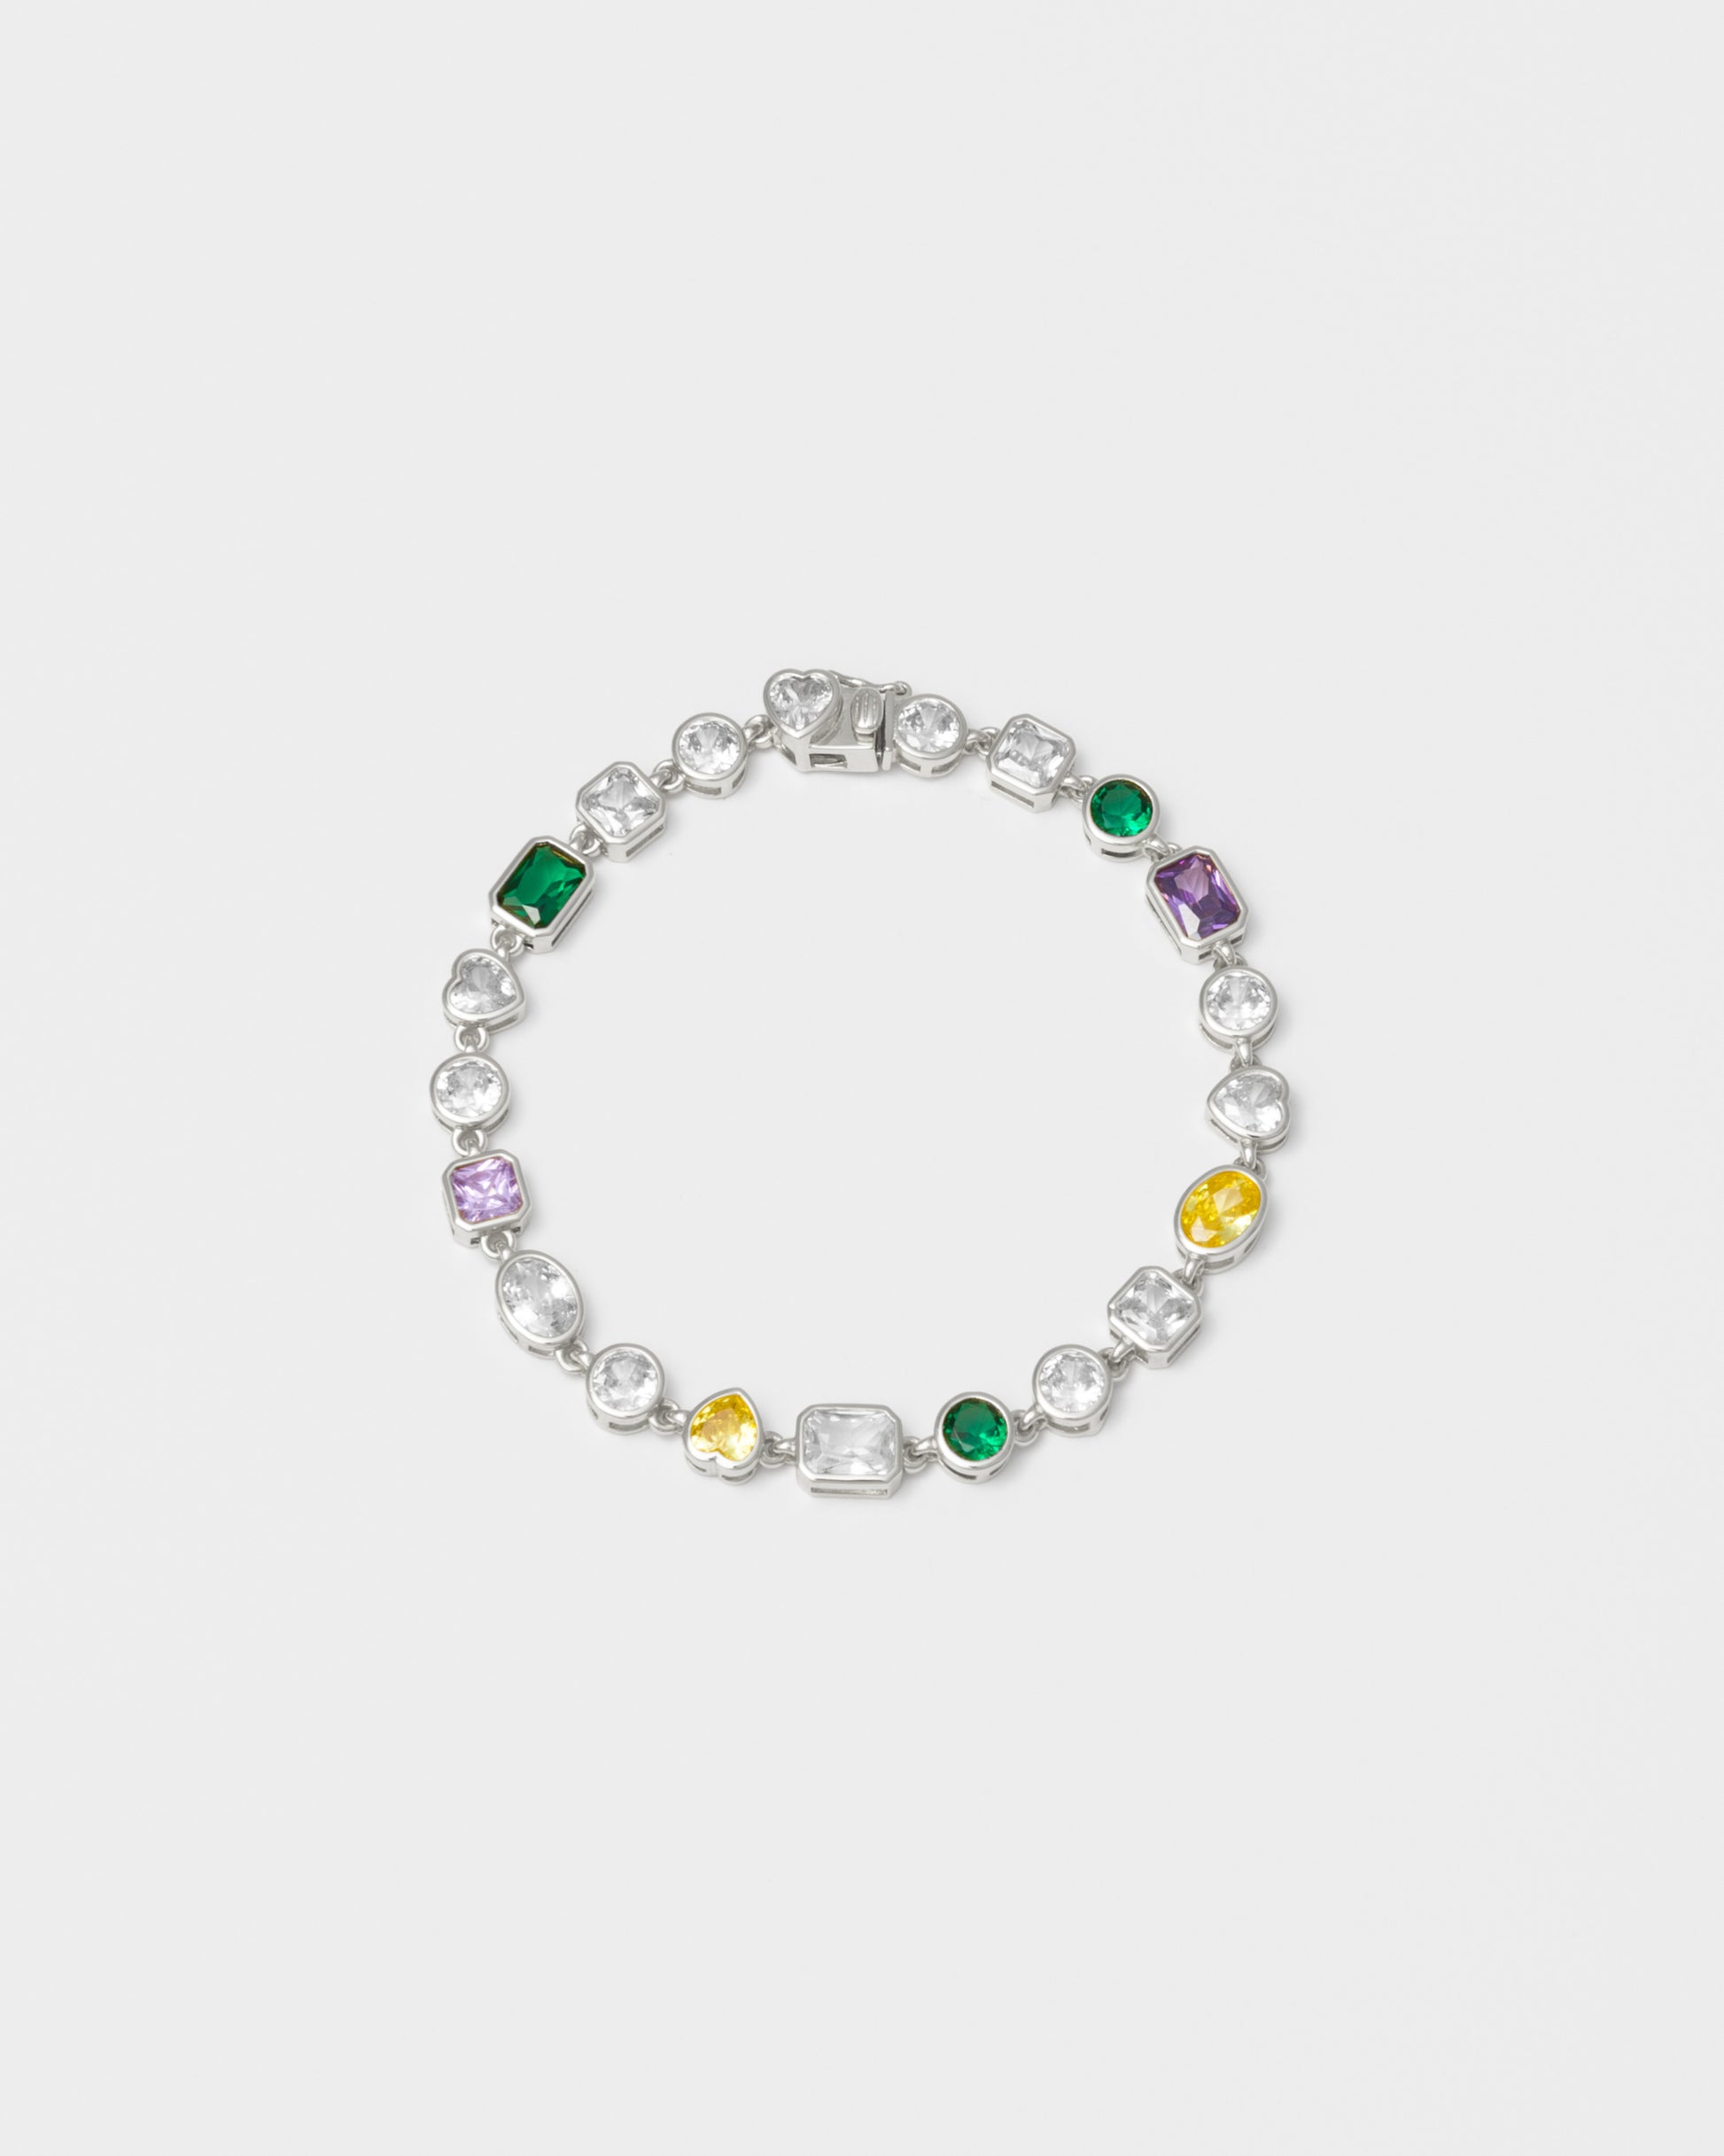 mixed bezels chain bracelet with 18kt white gold coating and hand-set stones of irregular shapes and colors. Ensemble of rectangular, square, round and heart-shaped stones in diamond white, amethyst, lilac, emerald green and gold yellow. Invisible closure with logo.